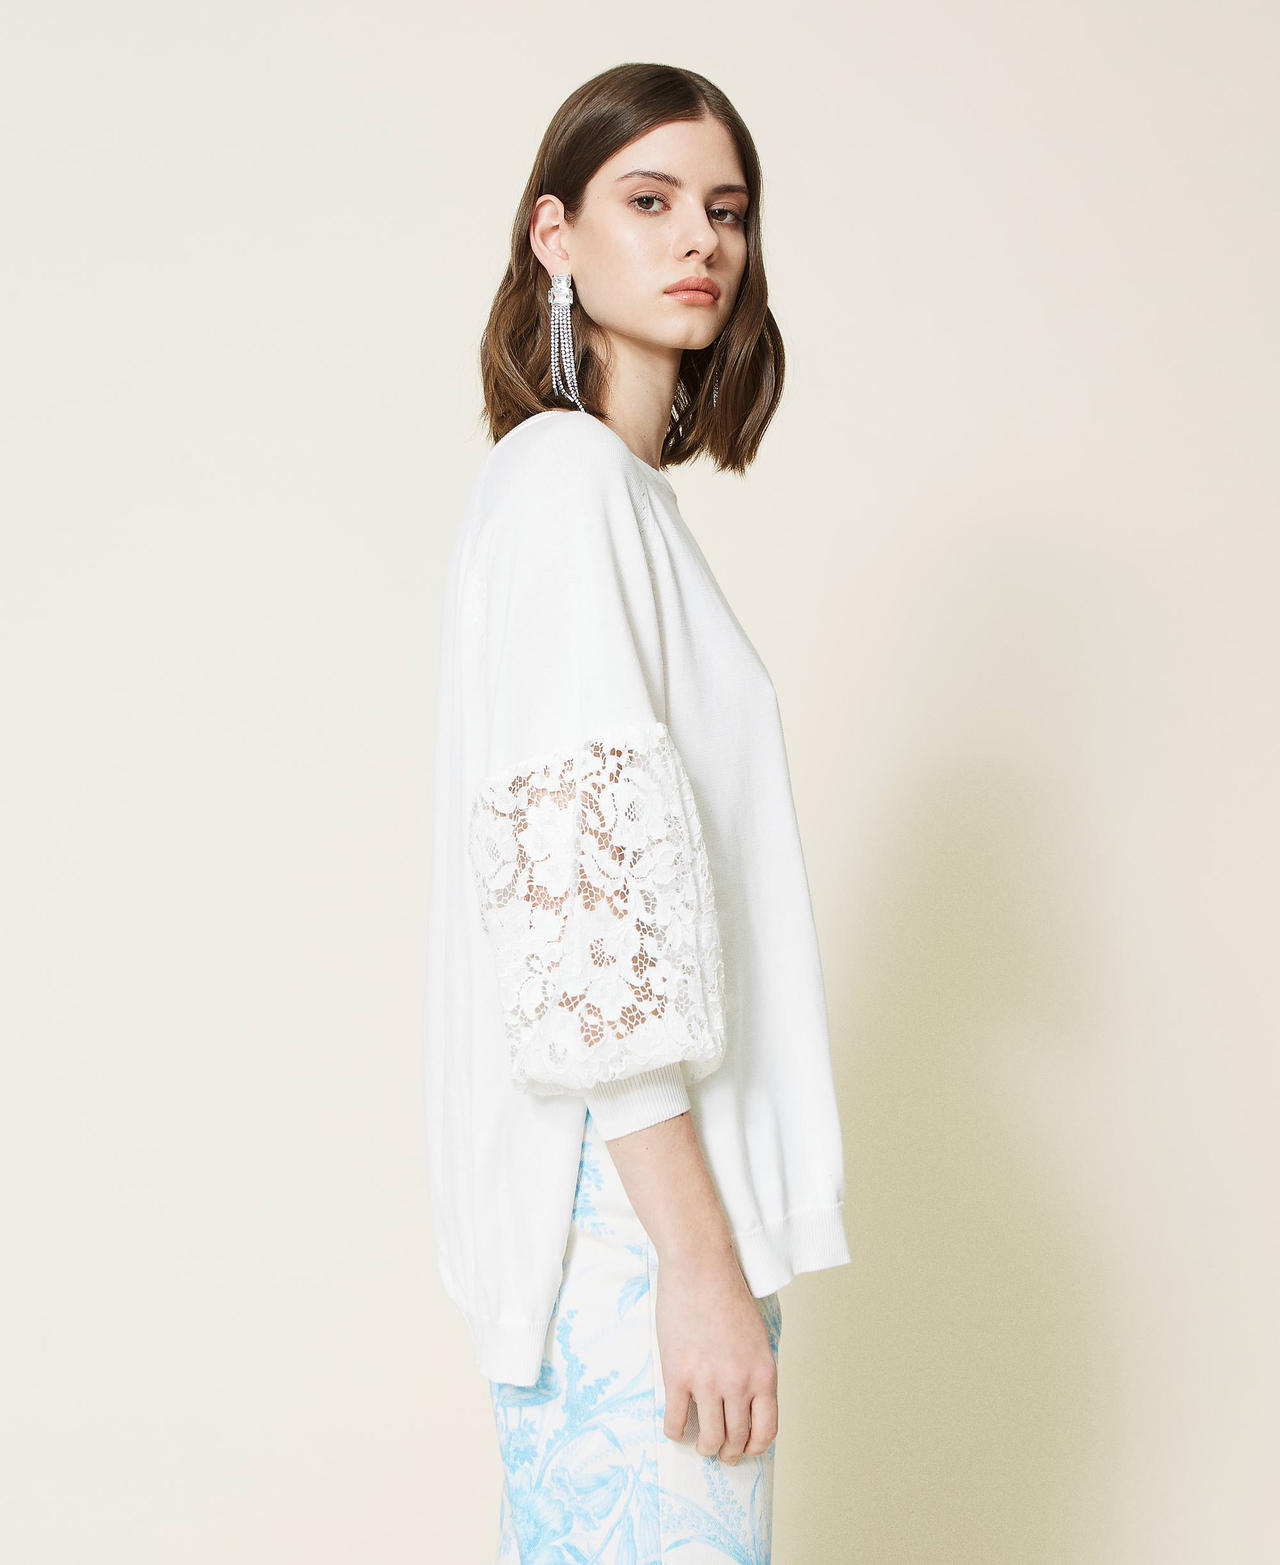 Oversized jumper with macramé lace Lily Woman 221TP3312-03